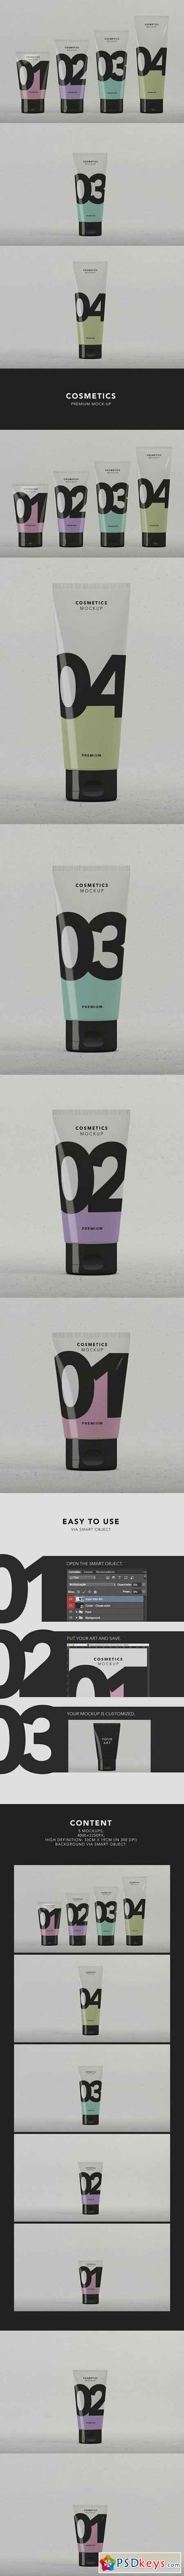 Cosmetics Package Mock-up 419337